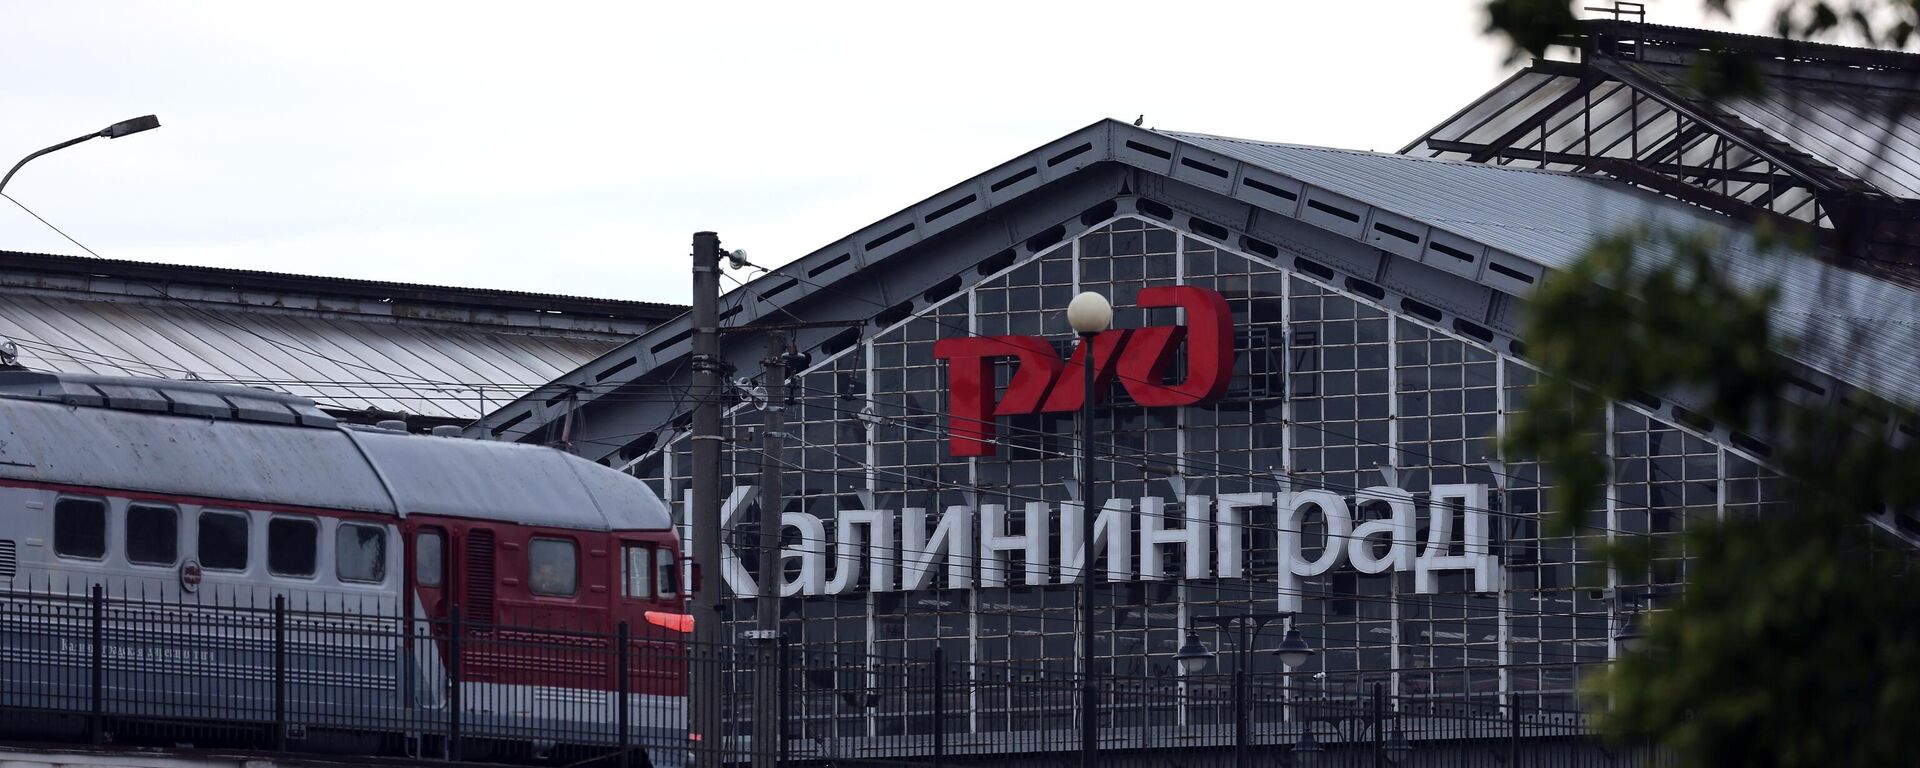 The logo of the Rassian Railways and inscription Kaliningrad are seen on the roof gable of the railway station in Kaliningrad, Russia. Lithuania says ban on rail cargo transit from Russia to Kaliningrad directed by EU. - Sputnik International, 1920, 11.07.2022